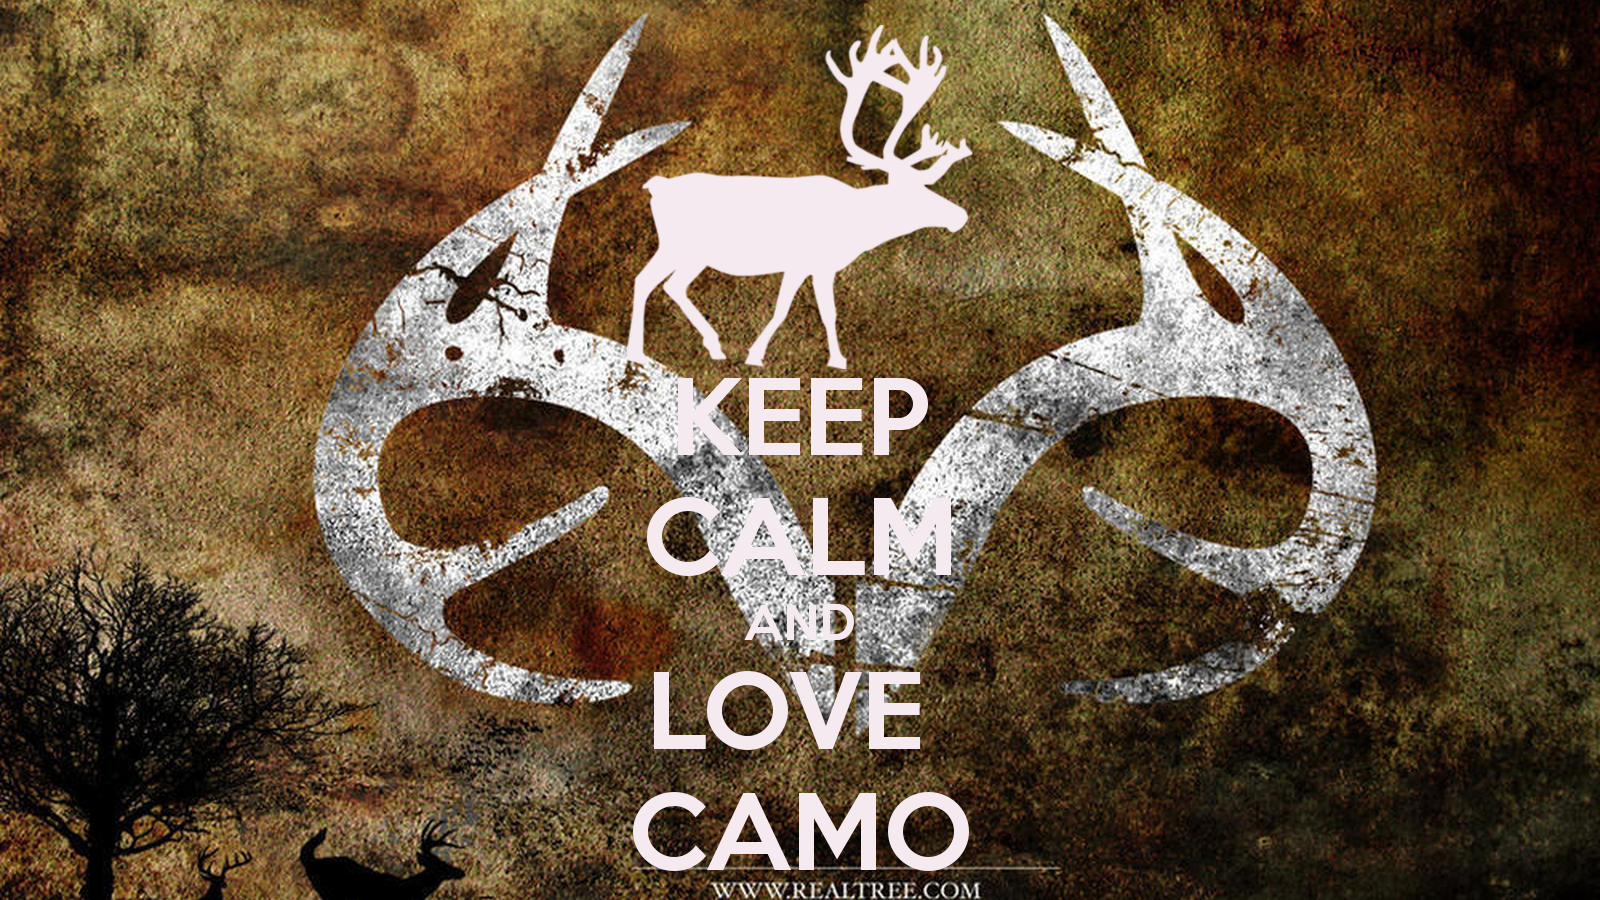 Browning Love Camo Wallpaper Ing Gallery